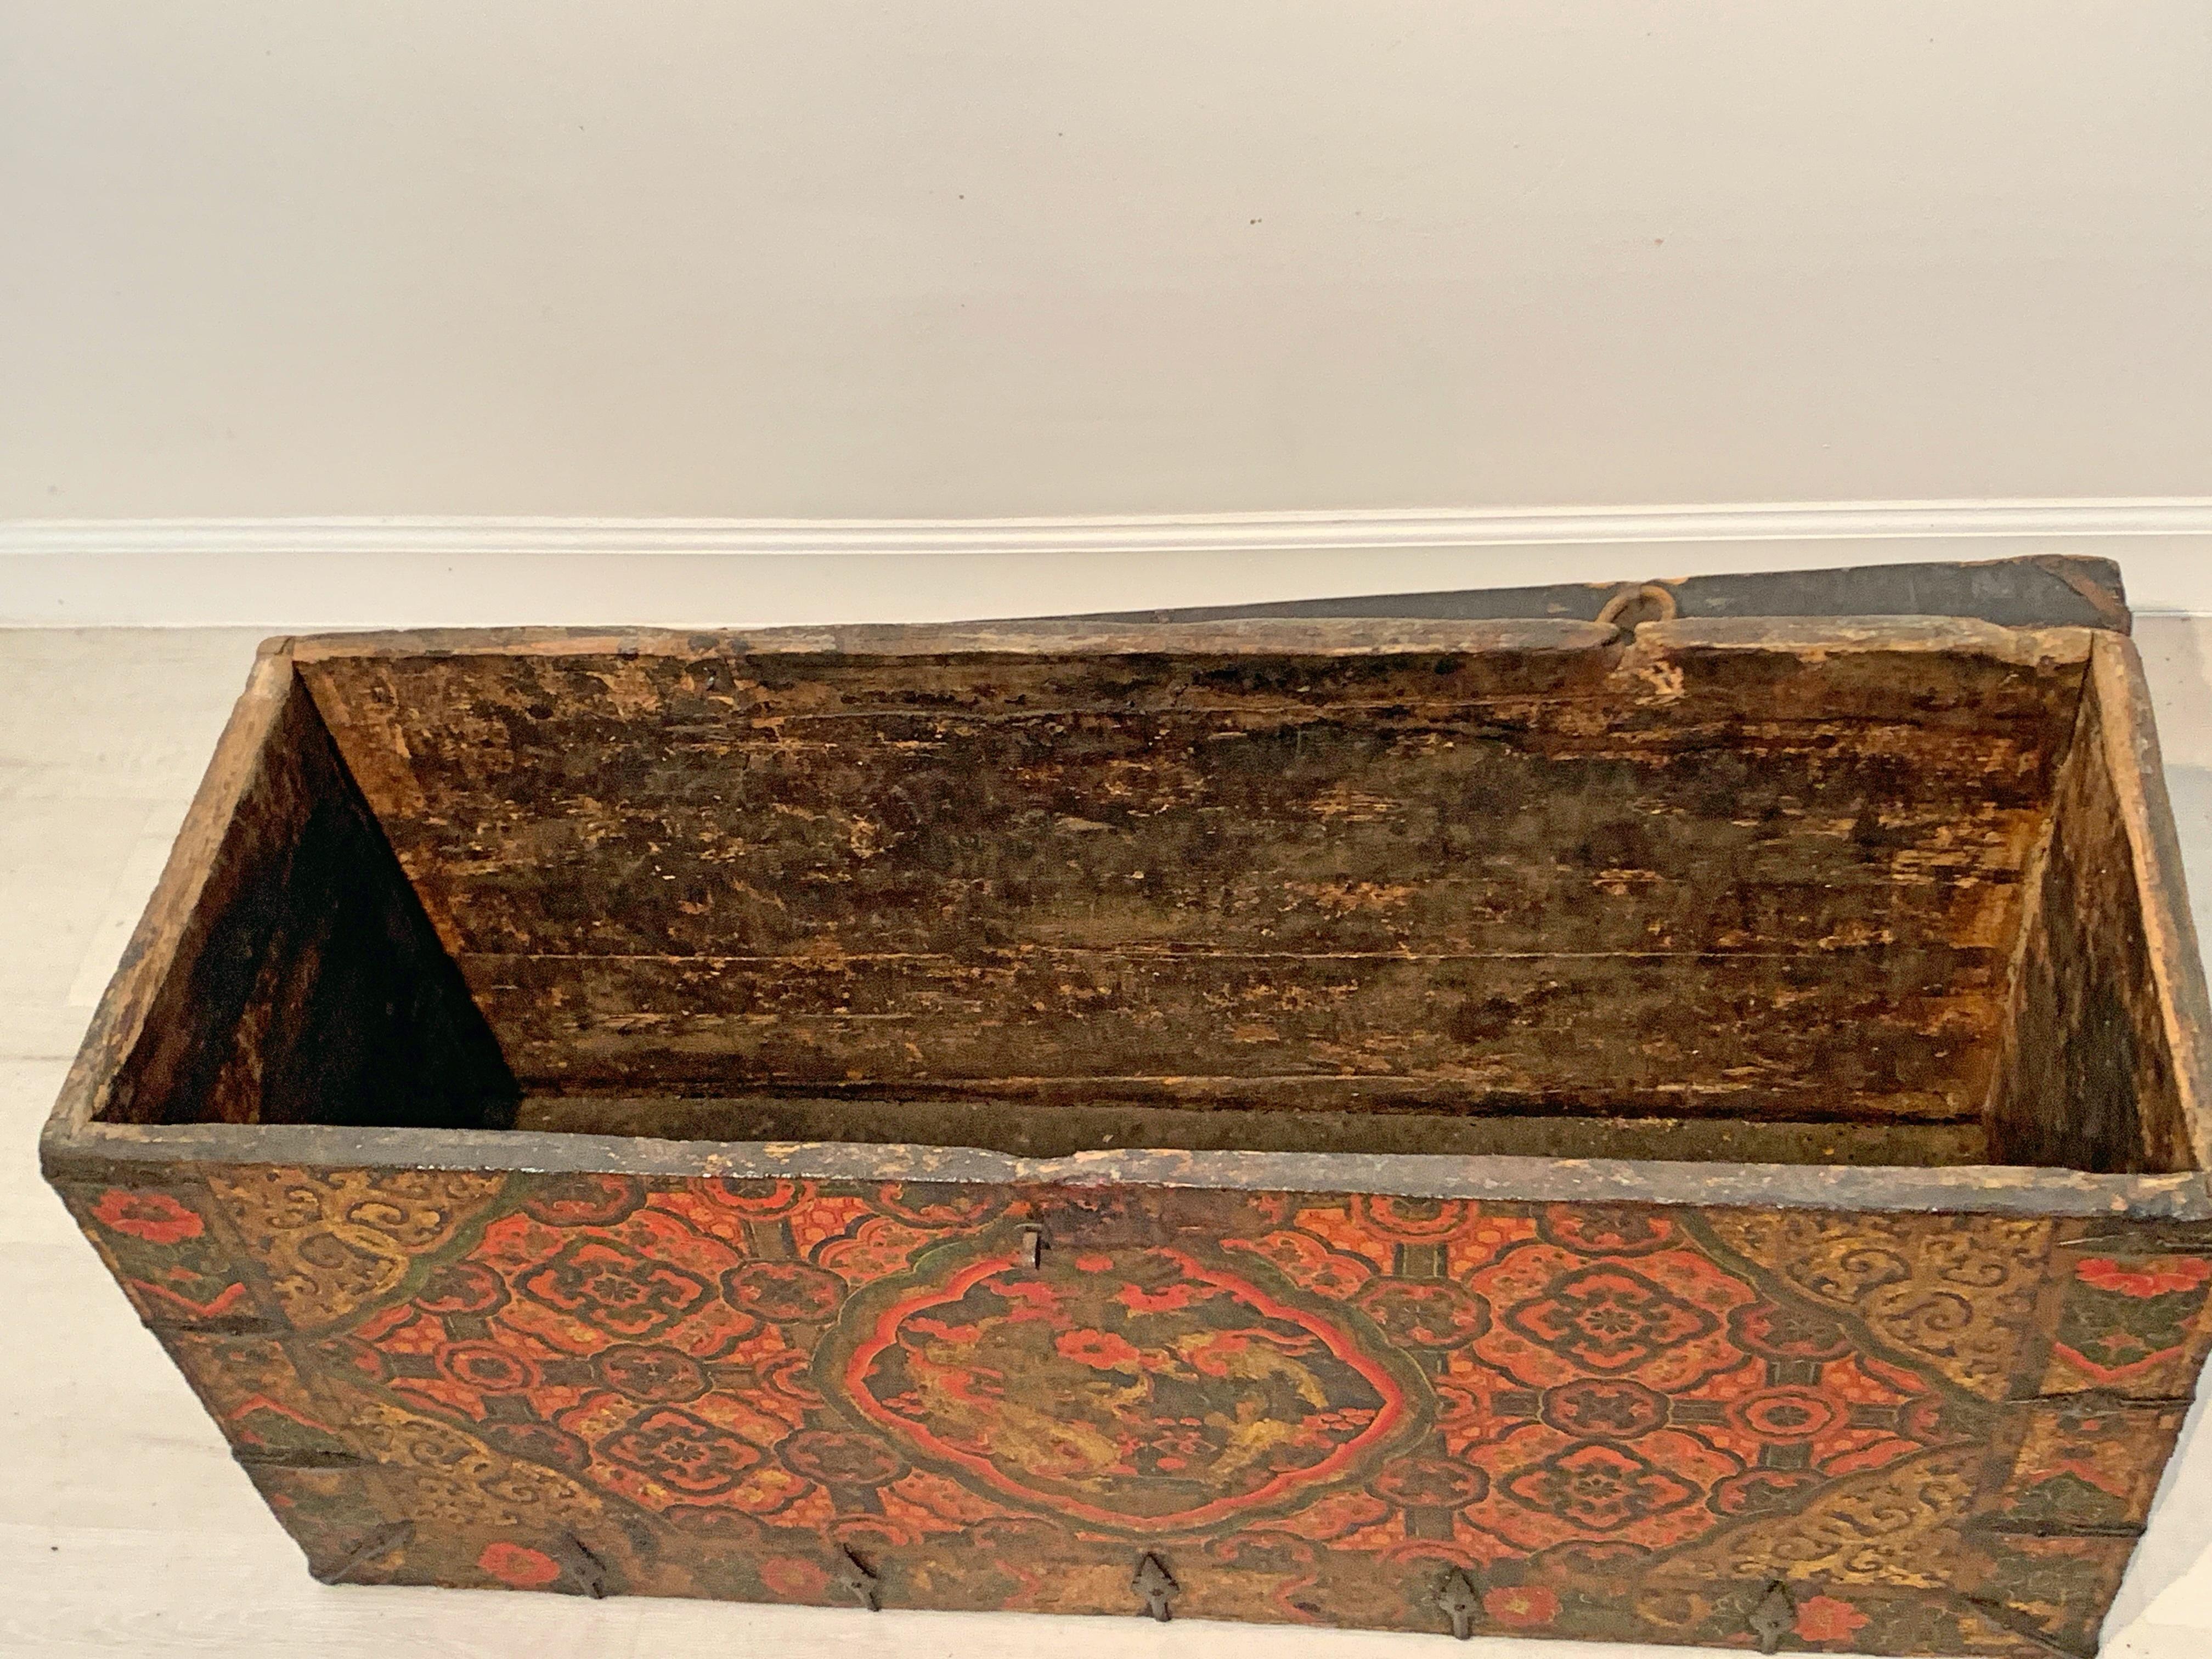 Tibetan Painted Trunk with Dragon and Brocade Design, 17th-18th Century, Tibet 11